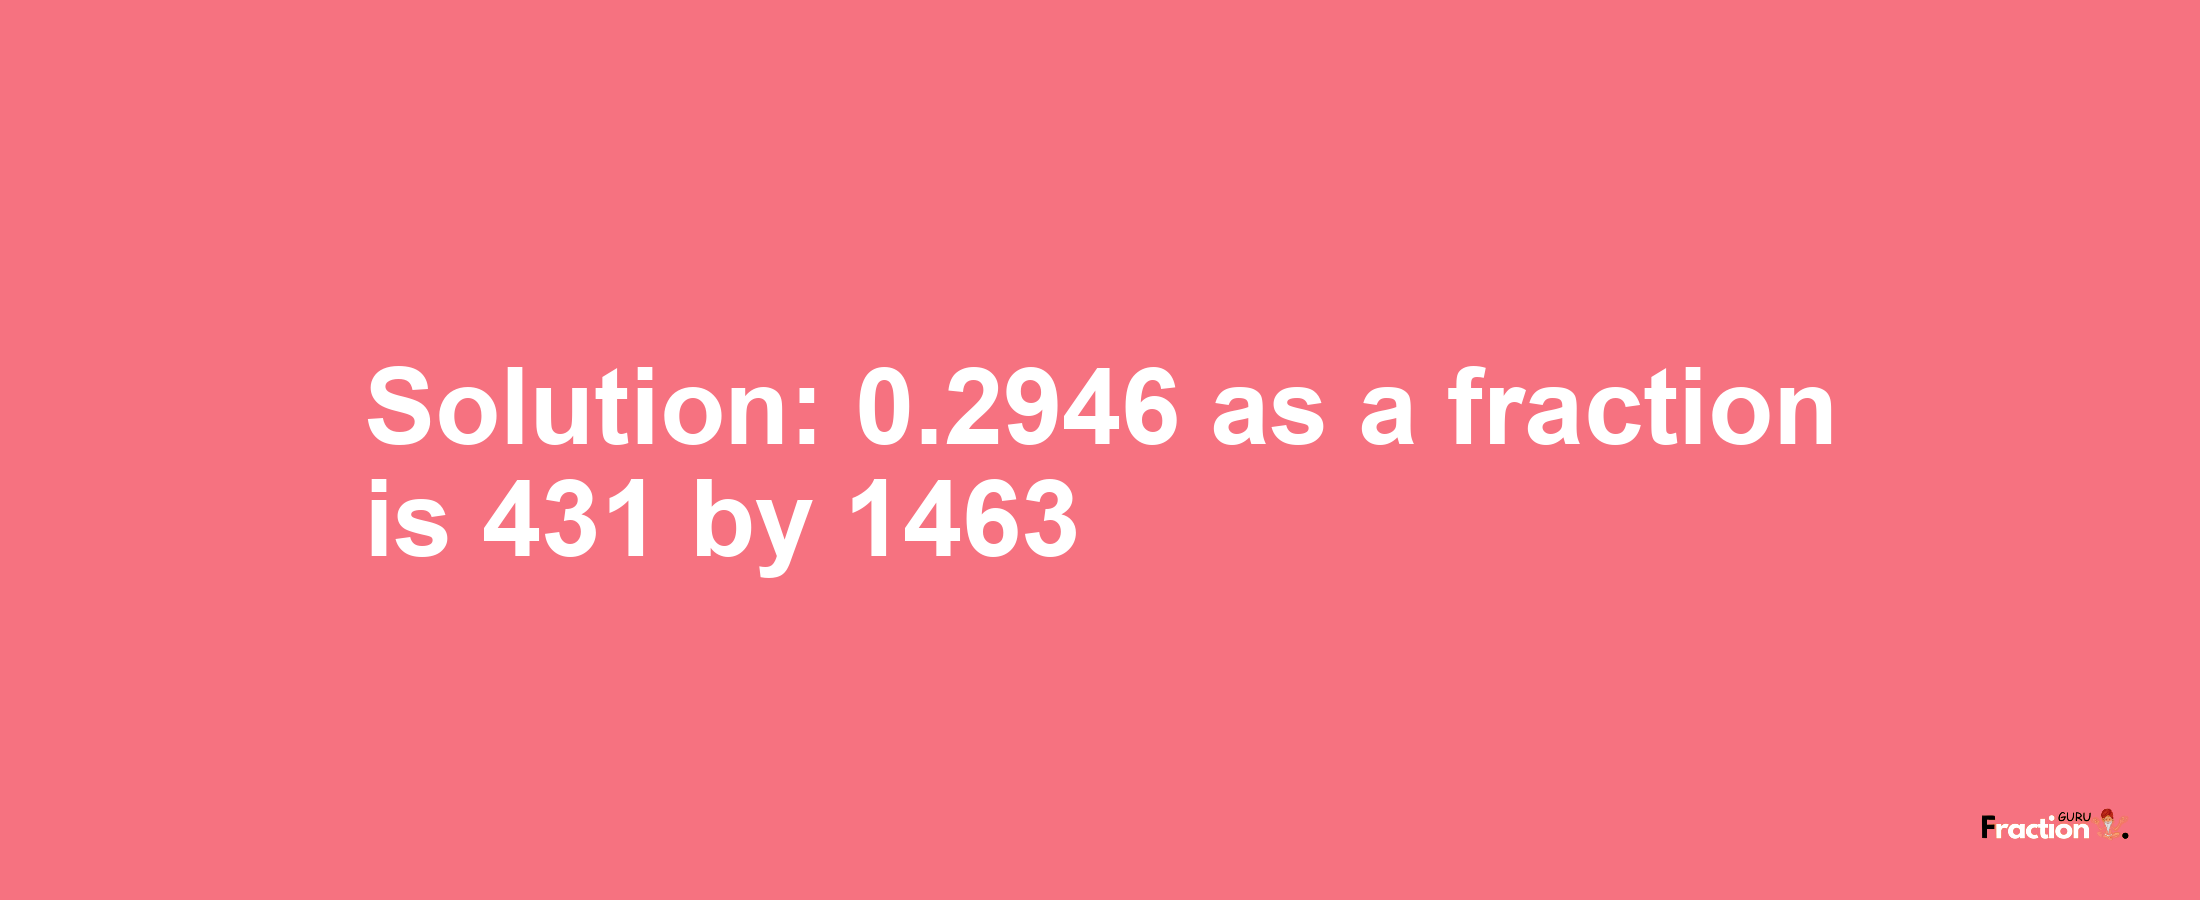 Solution:0.2946 as a fraction is 431/1463